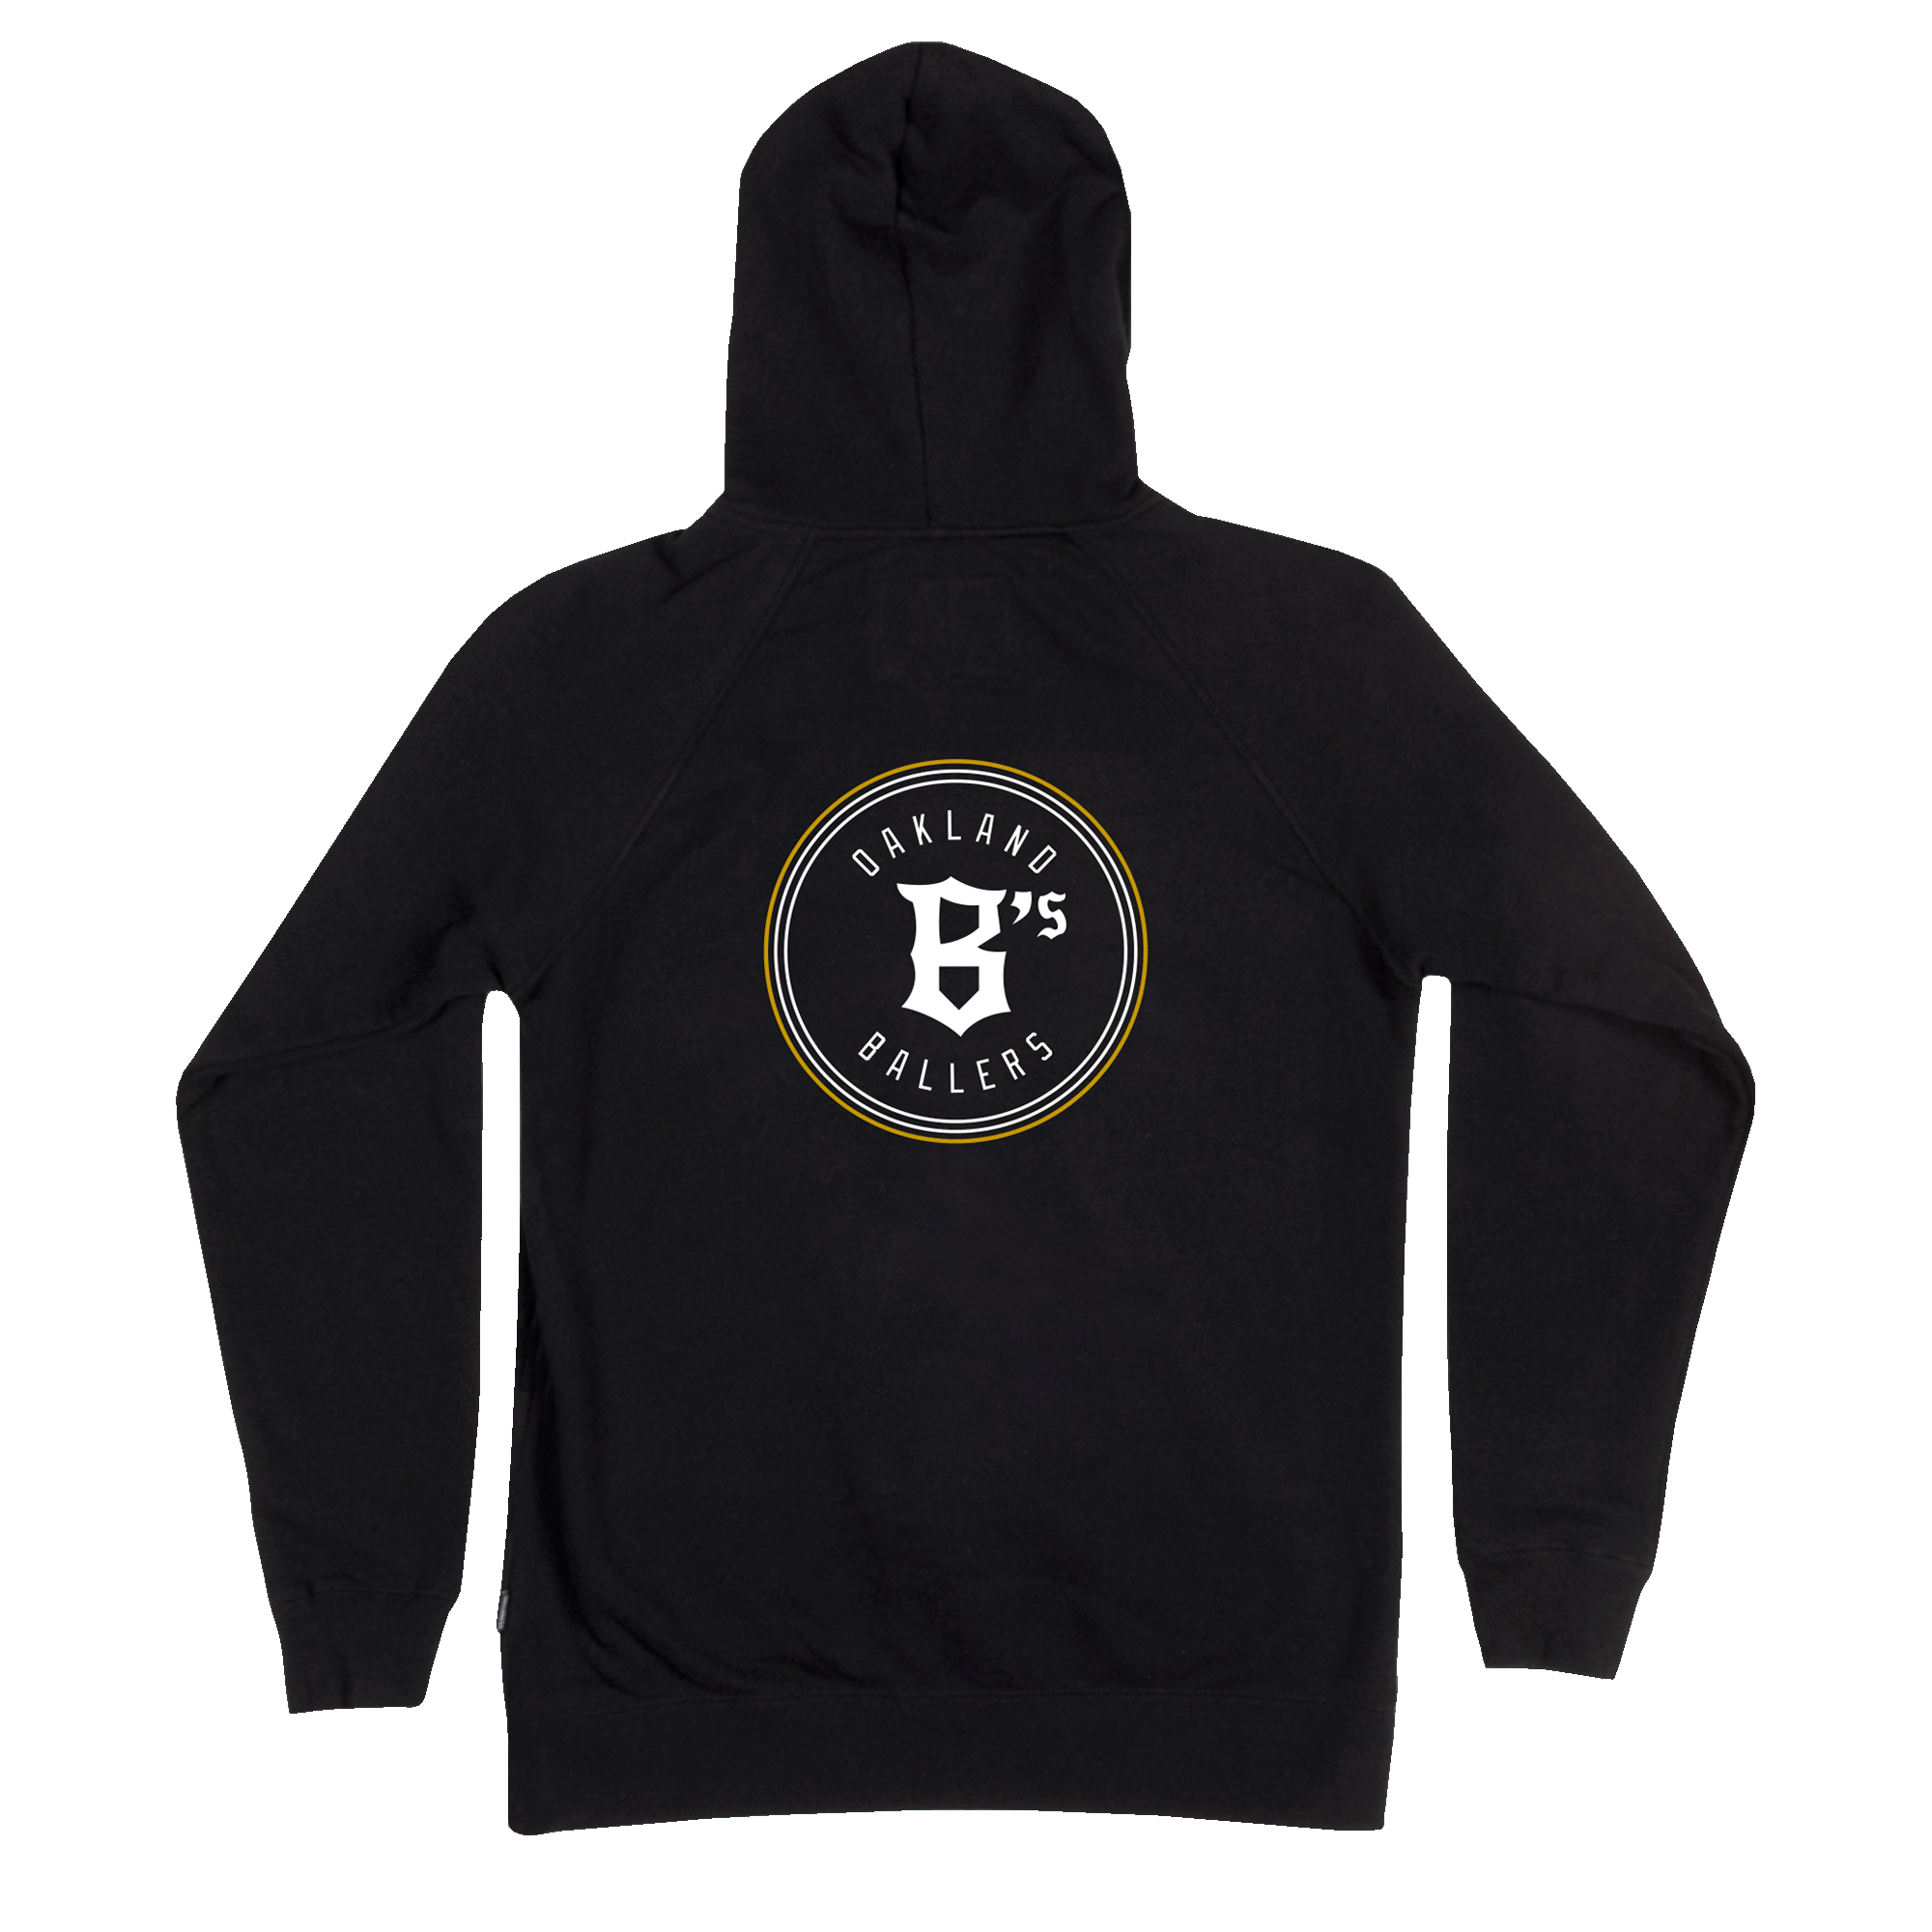 Backside view of a black zip-up hooded sweatshirt with a large round white and gold Oakland Ballers logo and wordmark on center back.